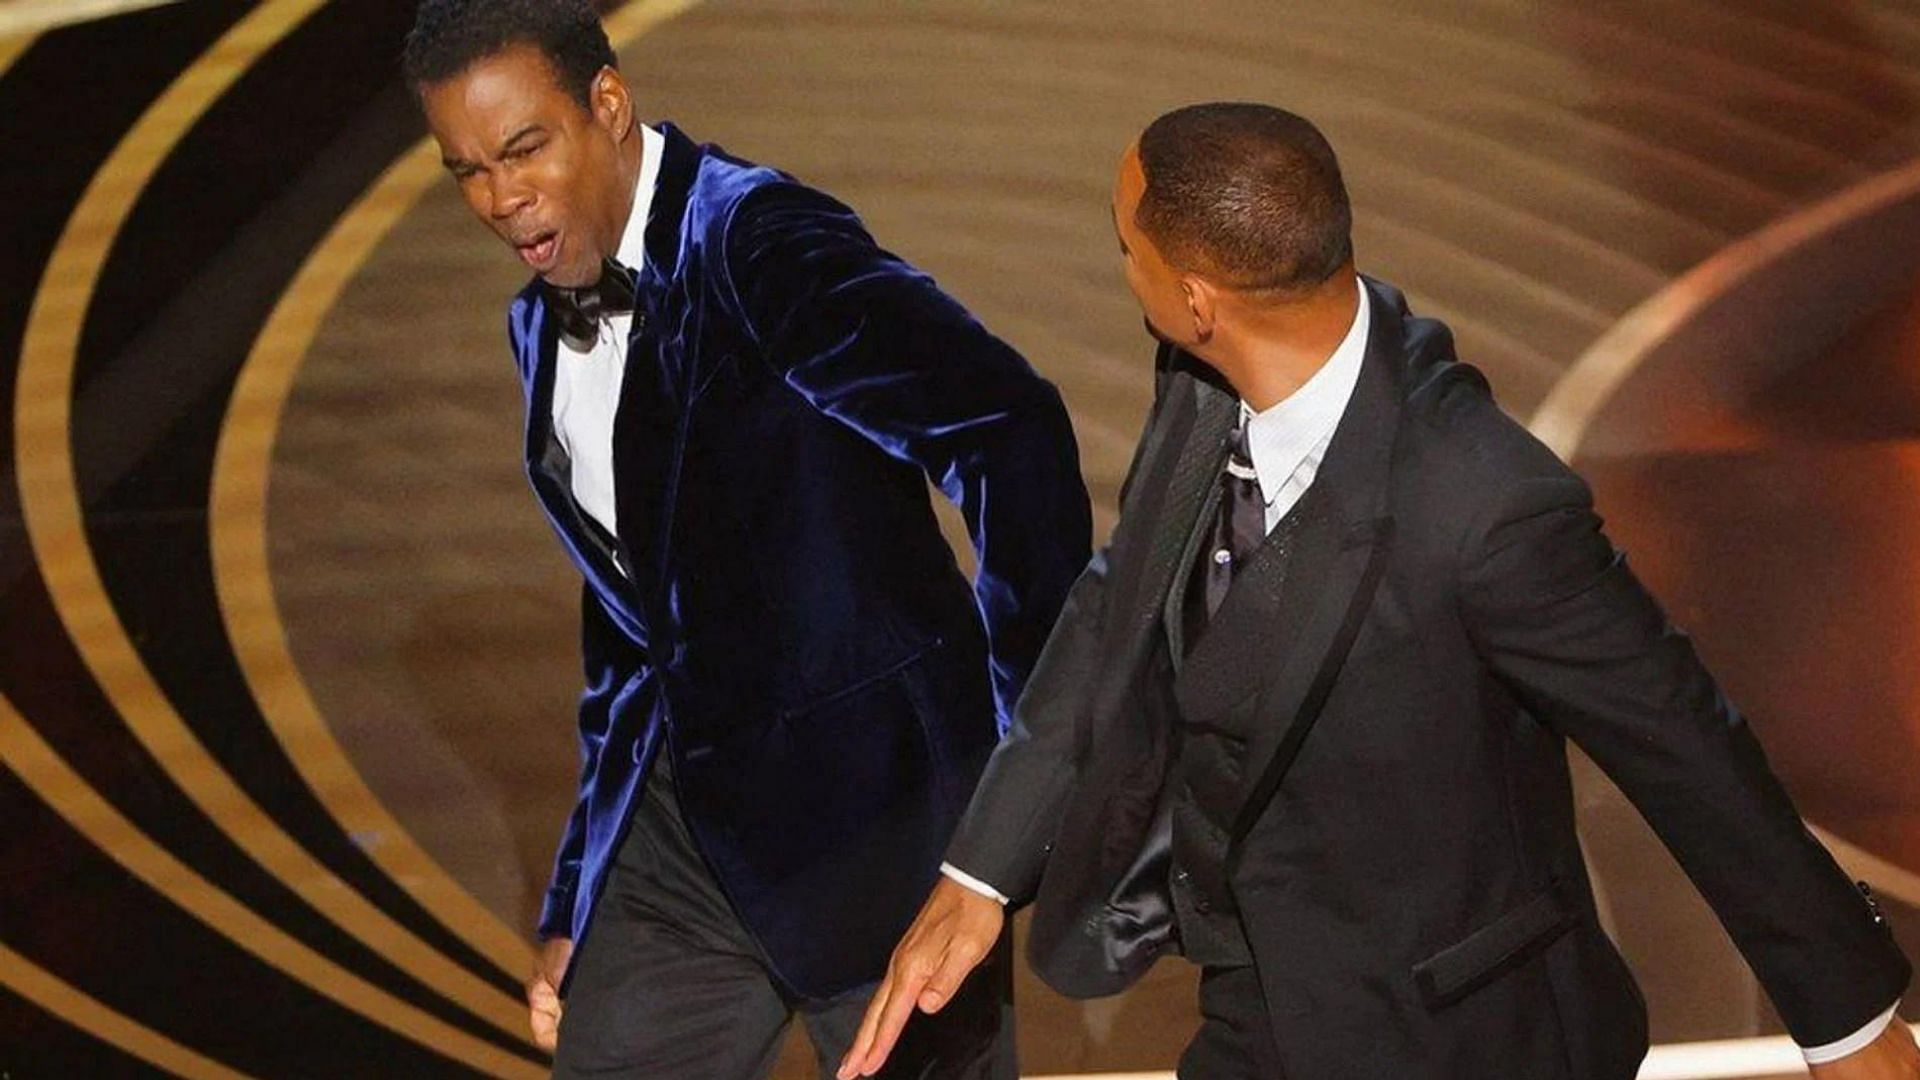 Will Smith and Chris Rock at Oscars 2022 (Image via Getty Images)